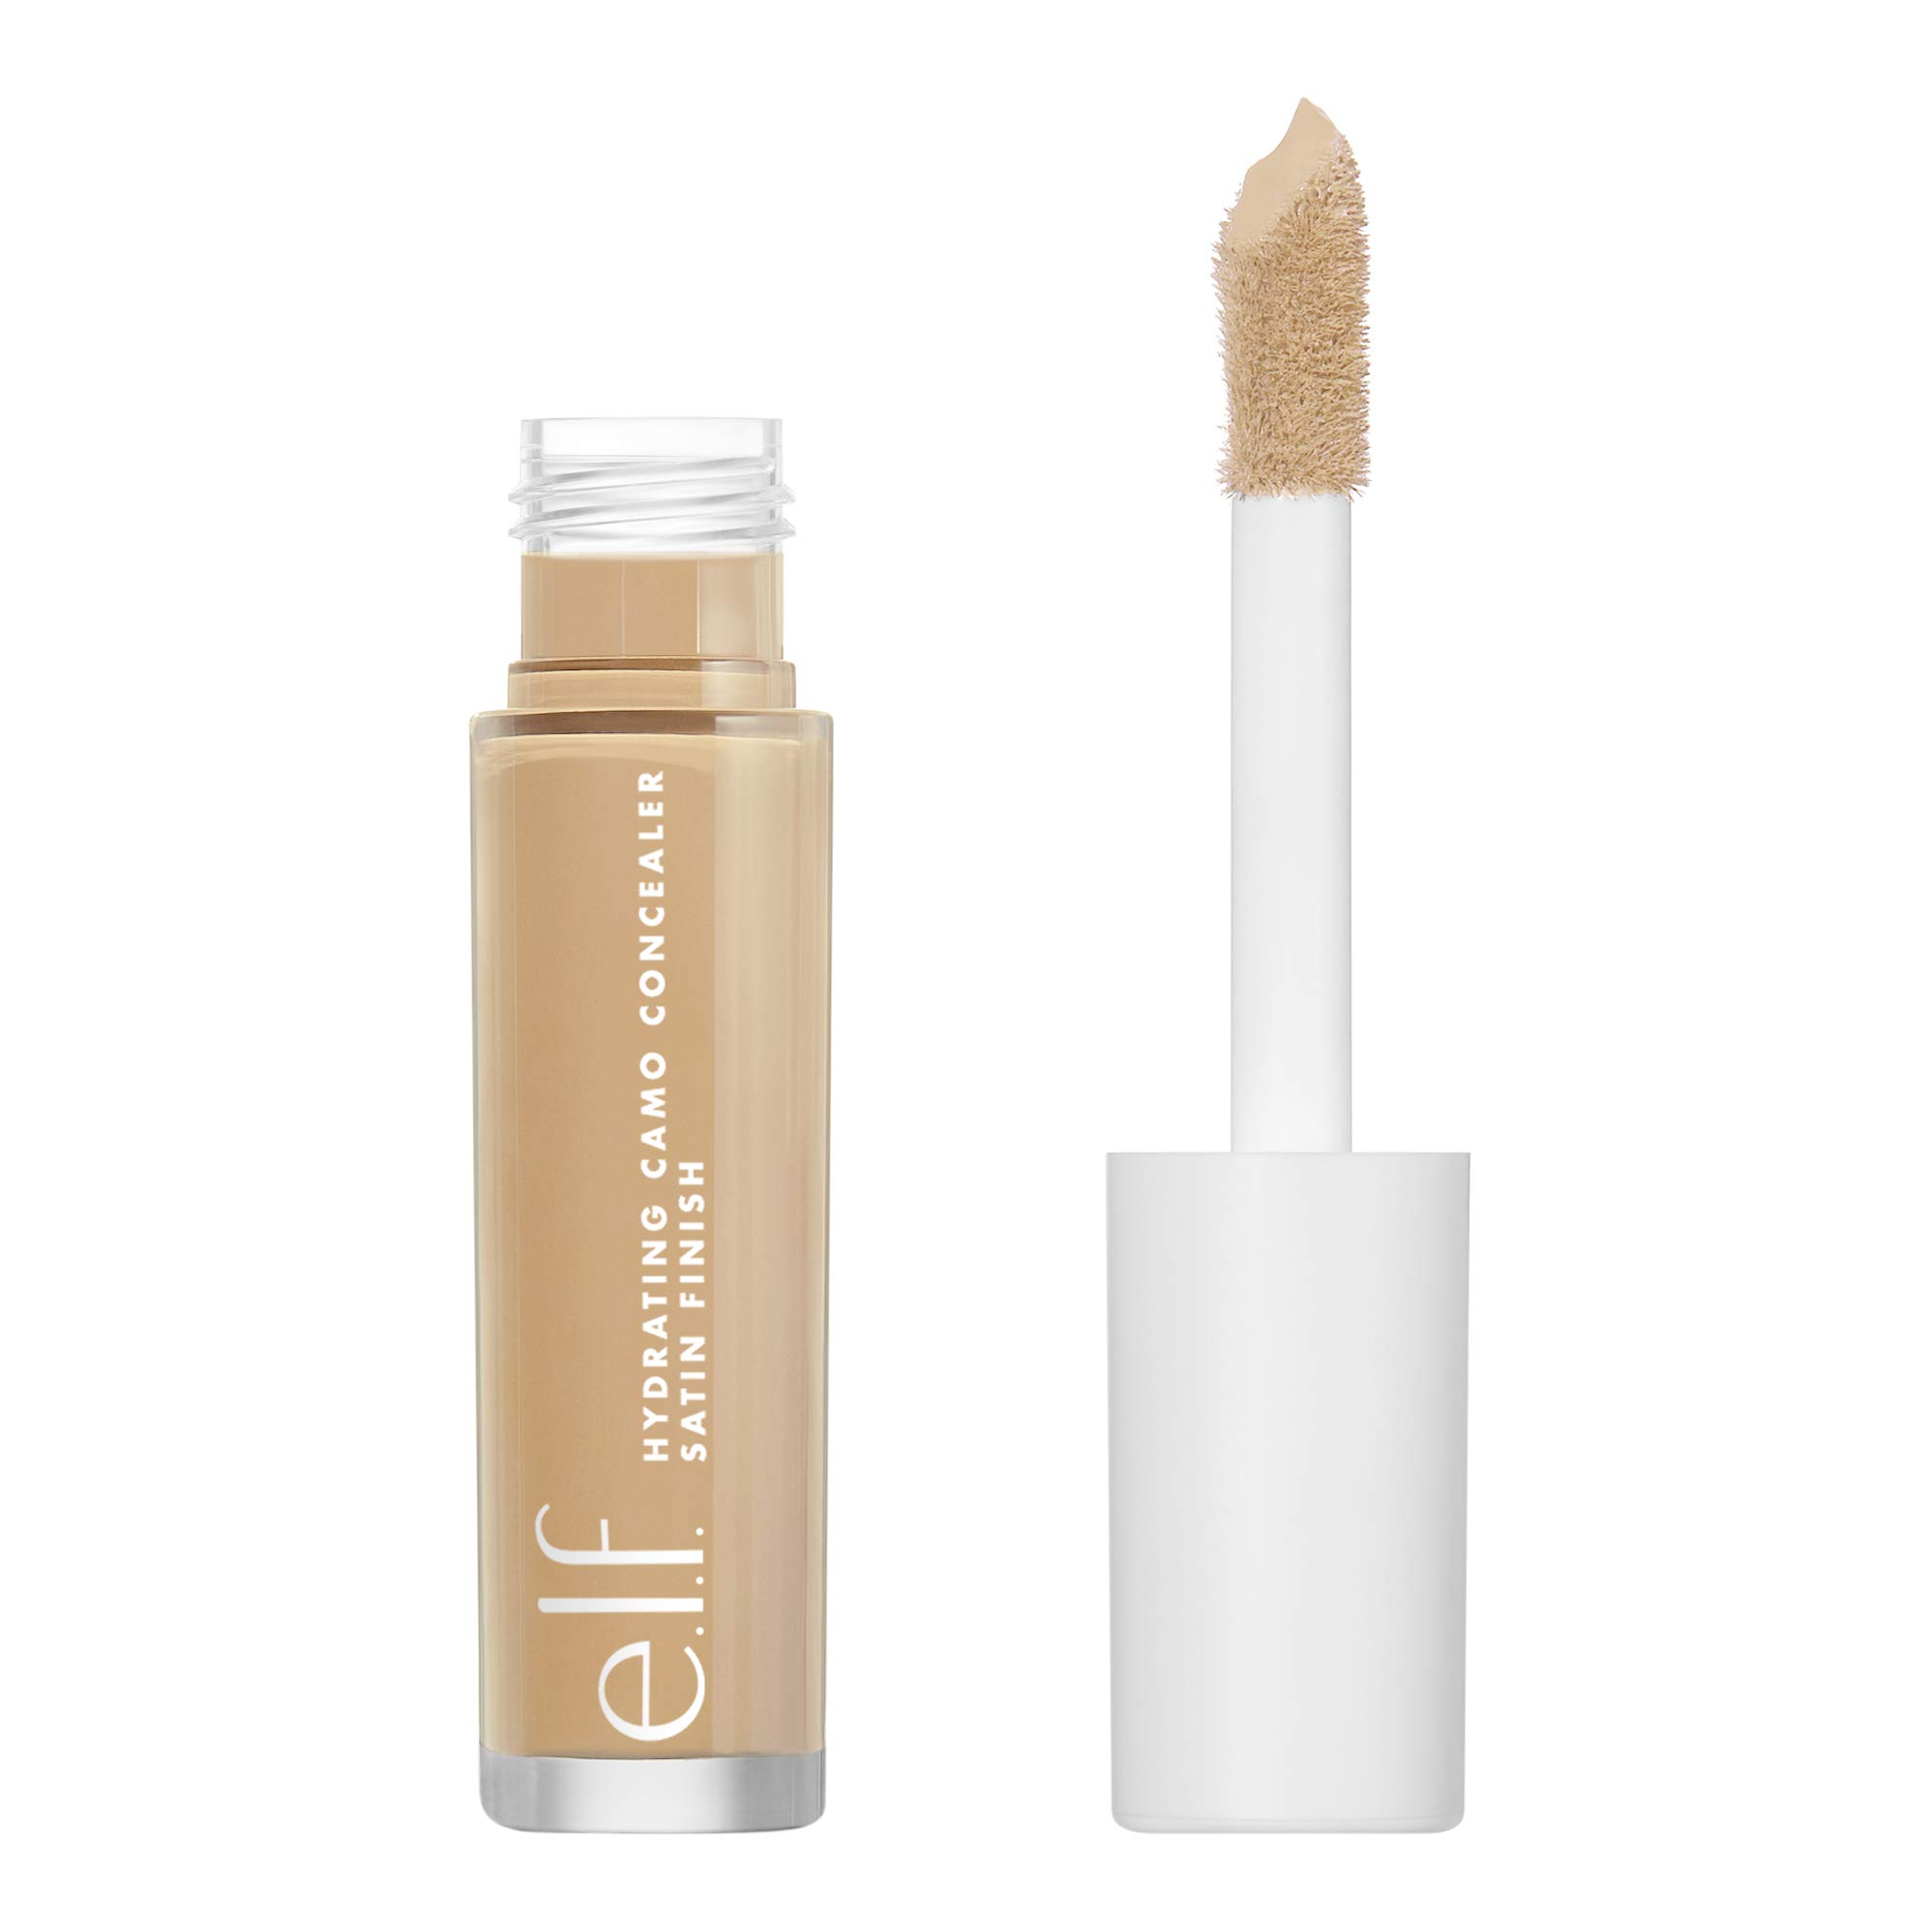 e.l.f, Hydrating Camo Concealer, Lightweight, Full Coverage, Long Lasting, Conceals, Corrects, Covers, Hydrates, Highlights, Tan Sand, Satin Finish, 25 Shades, All-Day Wear, 0.20 Fl Oz